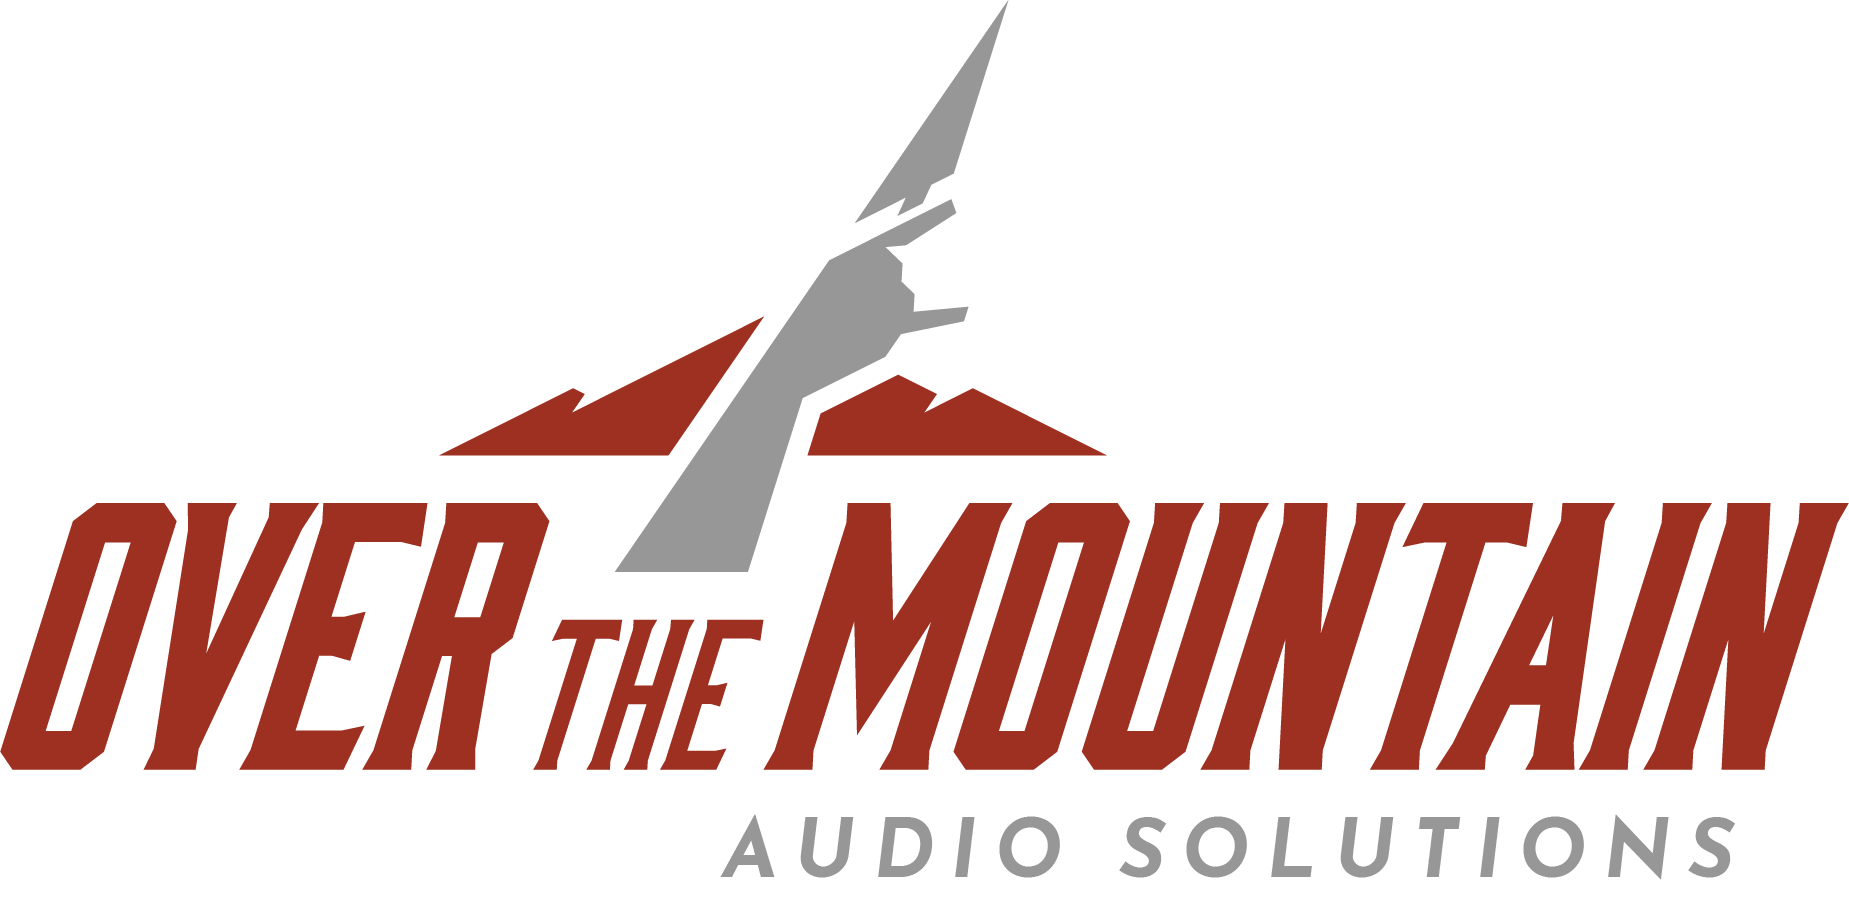 Over the Mountain Audio Solutions